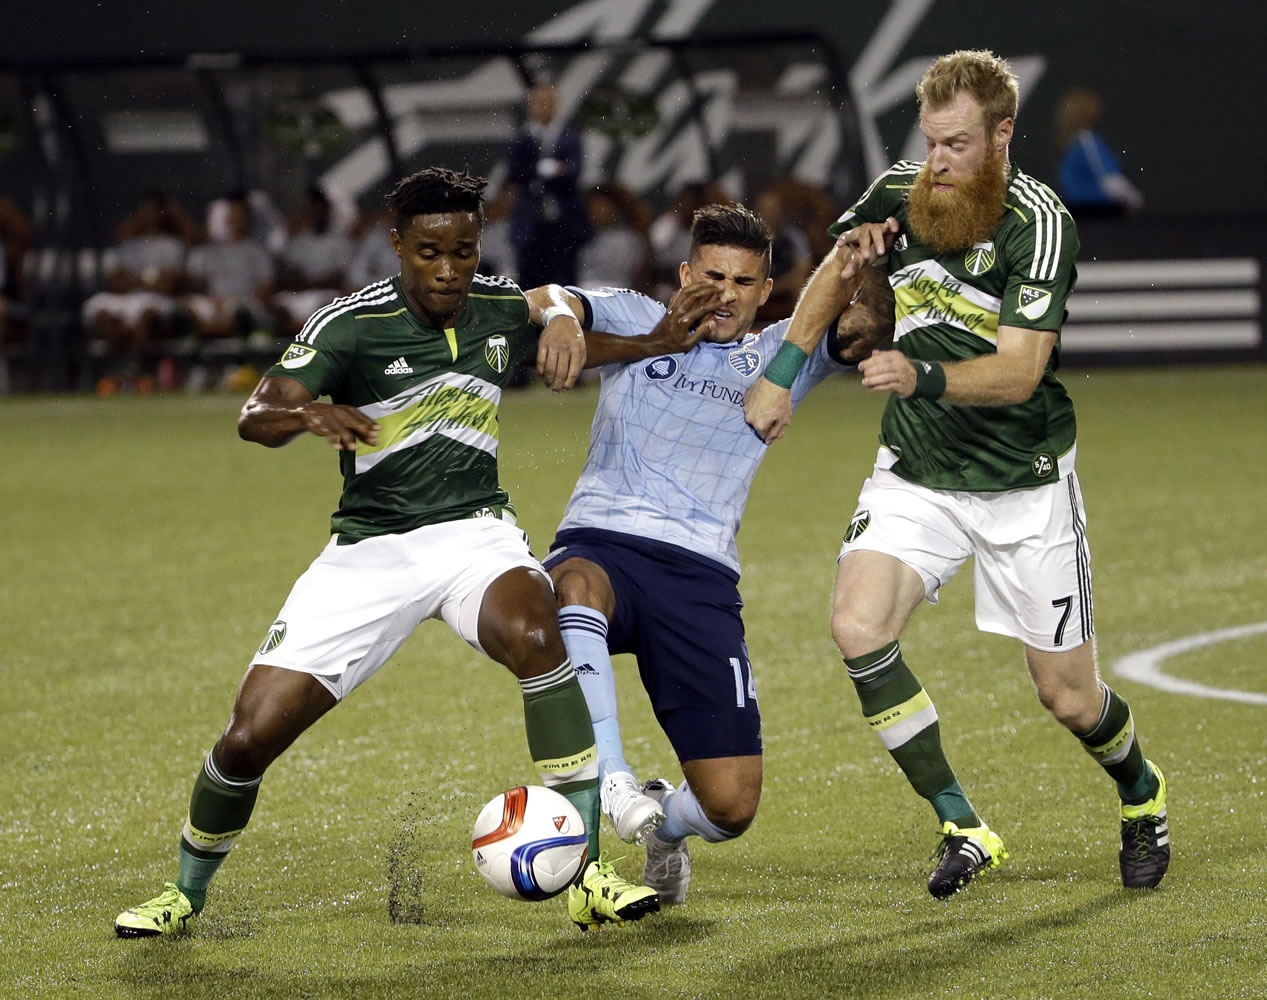 Sporting Kansas City forward Dom Dwyer, middle, battles for the ball with Portland Timbers midfielder George Fochive, left, and defender Nat Borchers during the first half of an MLS soccer match in Portland, Ore., Wednesday, Sept. 9, 2015.